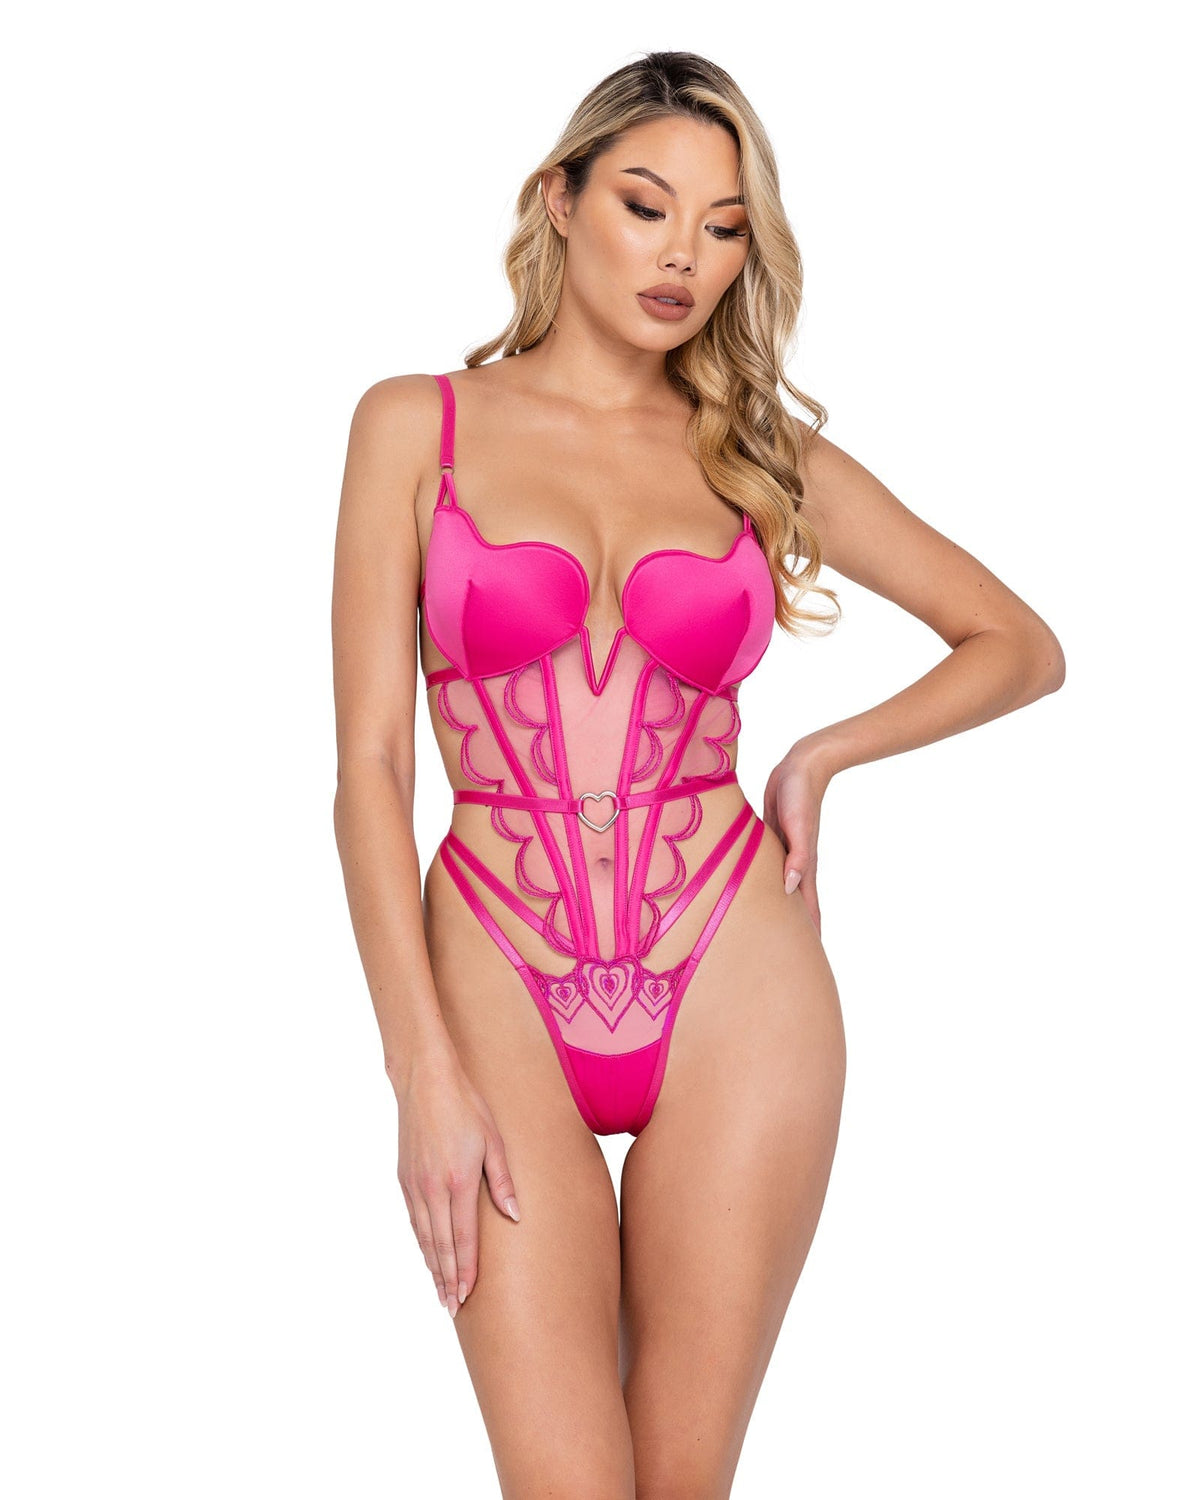 Roma Pink / Extra Small Bubblegum Metallic Lace Heart Cup Teddy Lingerie LI627-Pink-XS 2023 Sexy 2 Pc Bubblegum Satin Heart Cup Short Set Lingerie Apparel &amp; Accessories &gt; Clothing &gt; Underwear &amp; Socks &gt; Lingerie